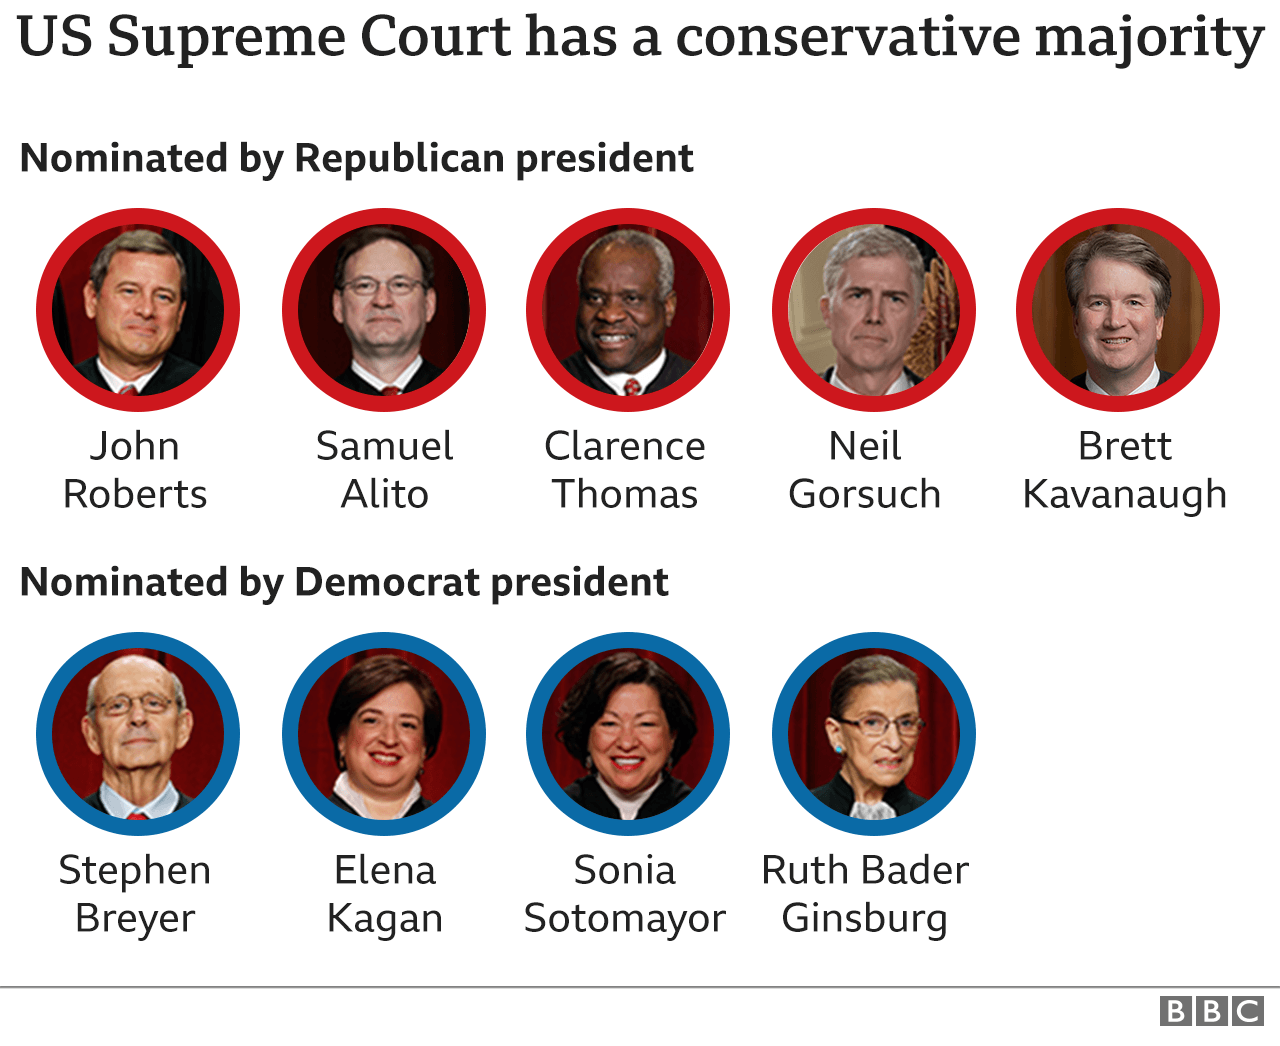 Graphic showing justices